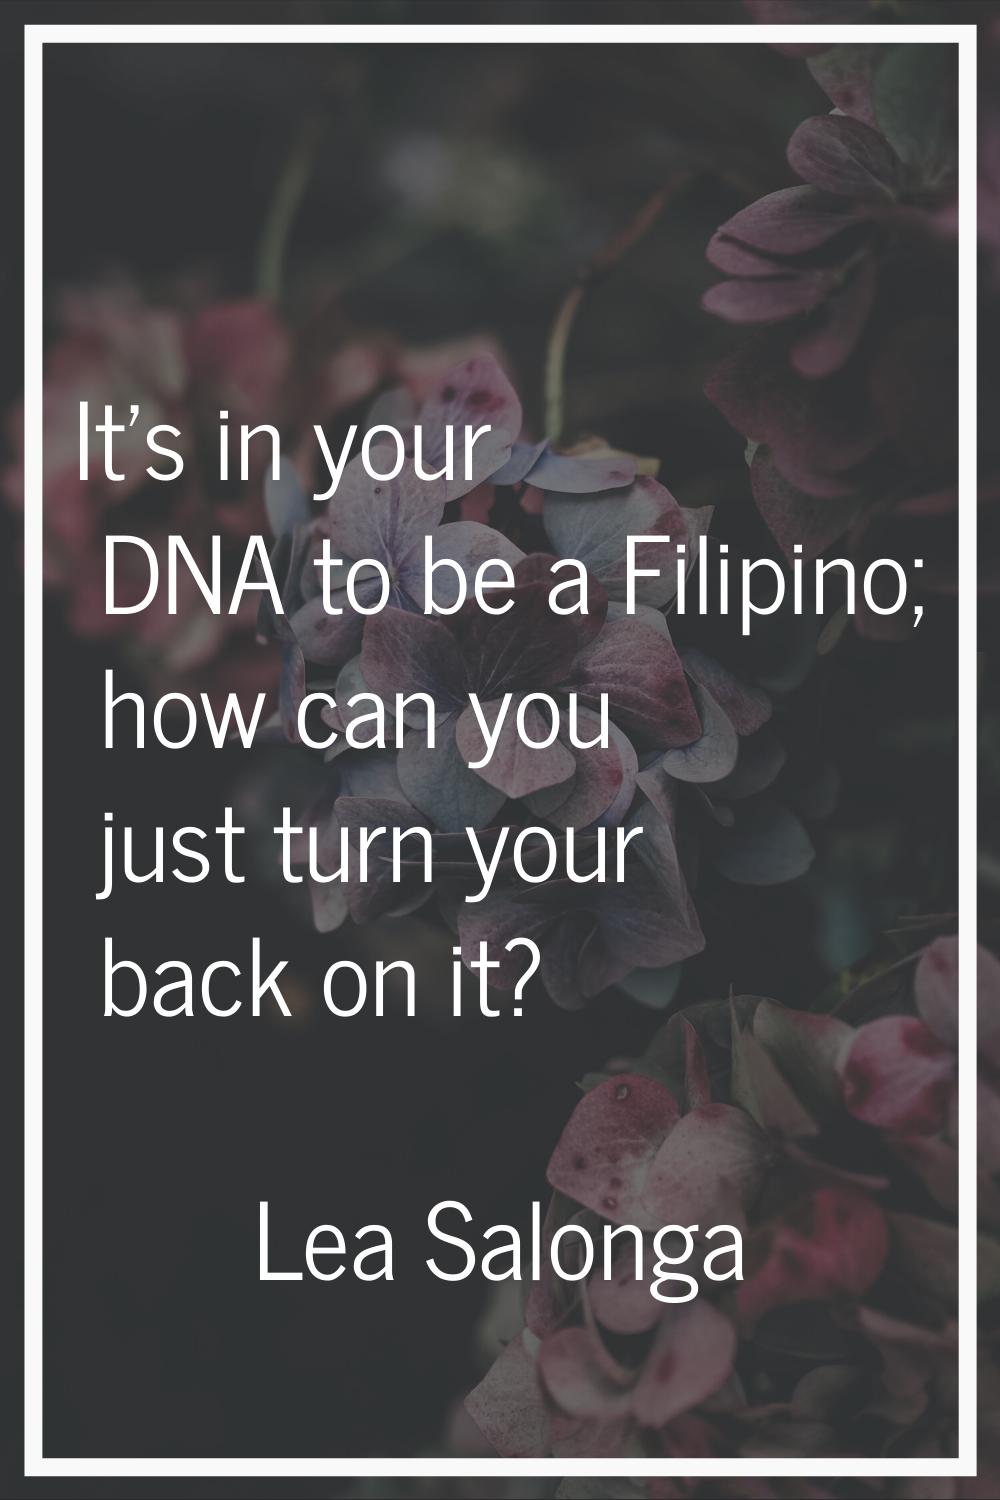 It's in your DNA to be a Filipino; how can you just turn your back on it?